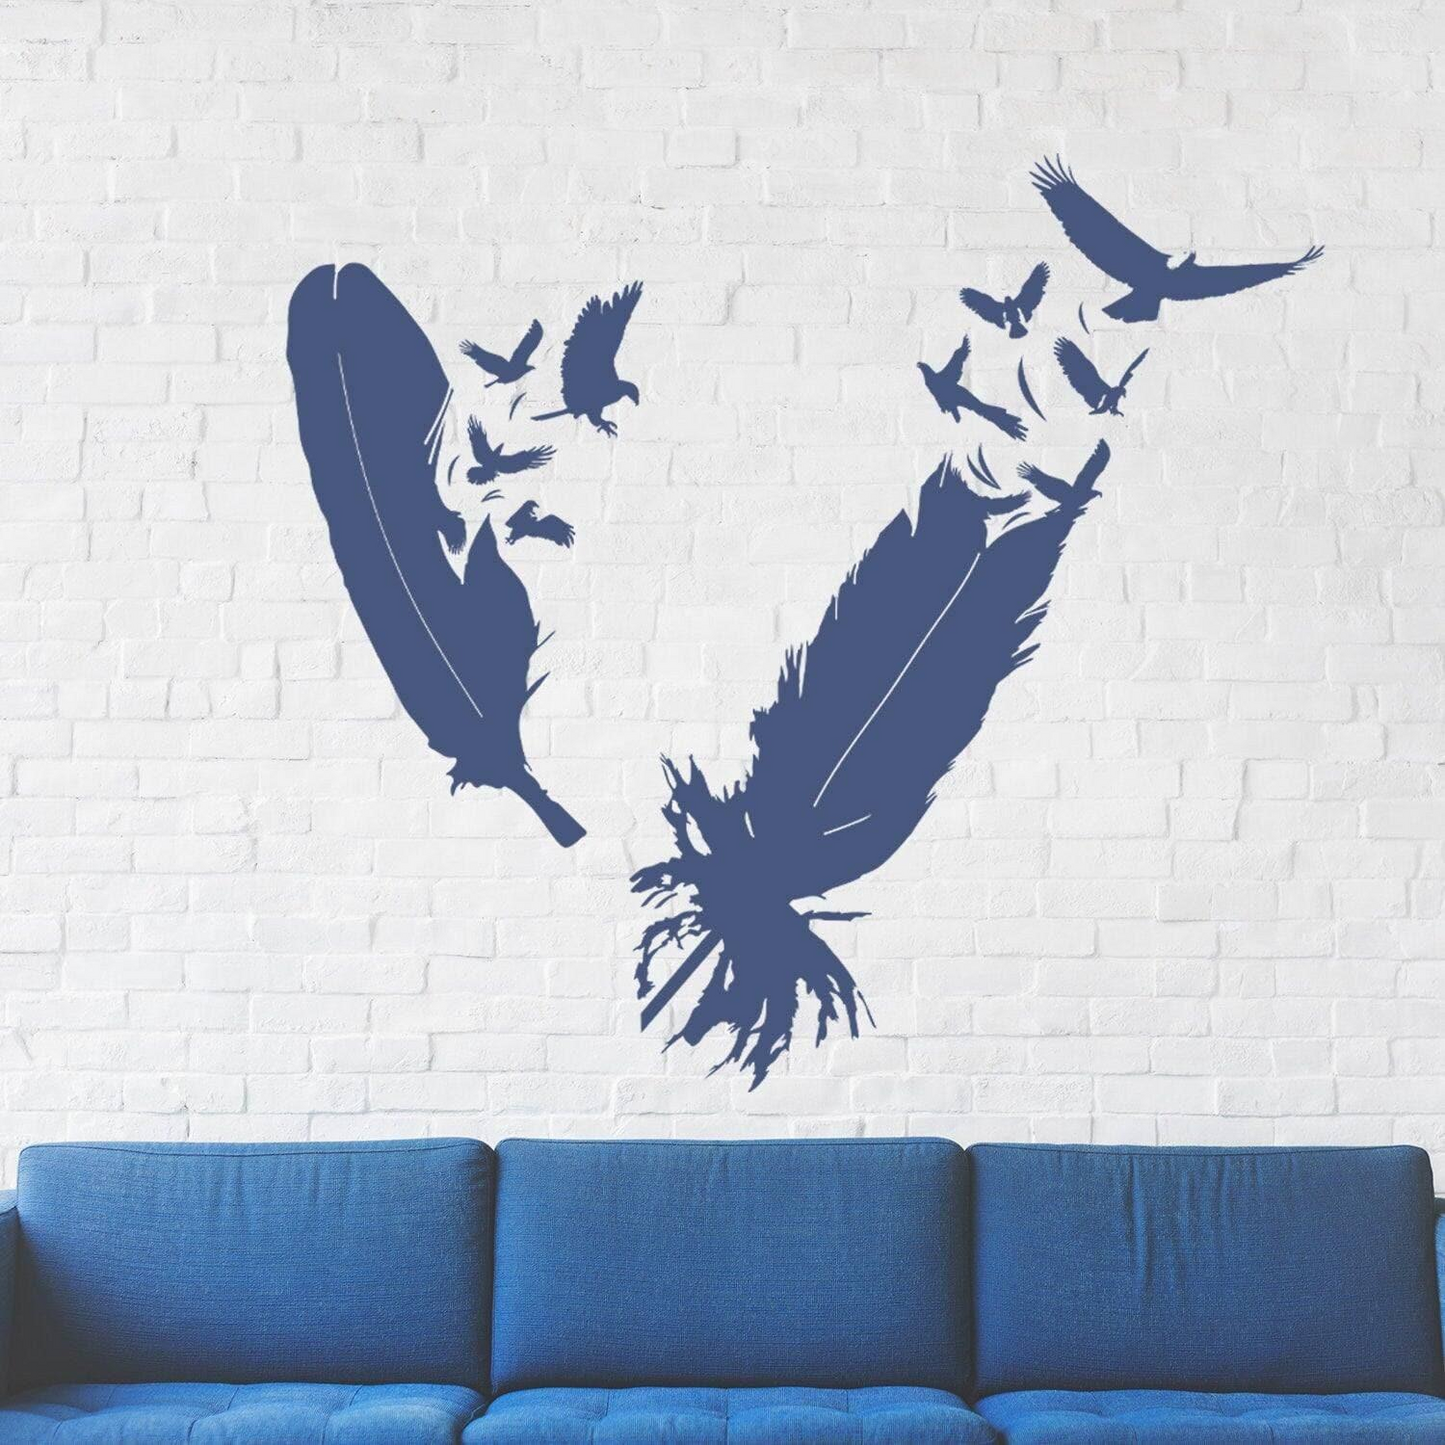 Bird Feather Wall Vinyl Sticker - Eagle Decor Flying Home Art Magic Nib Decal - Love Beautiful  Above The Bed And Window Mural